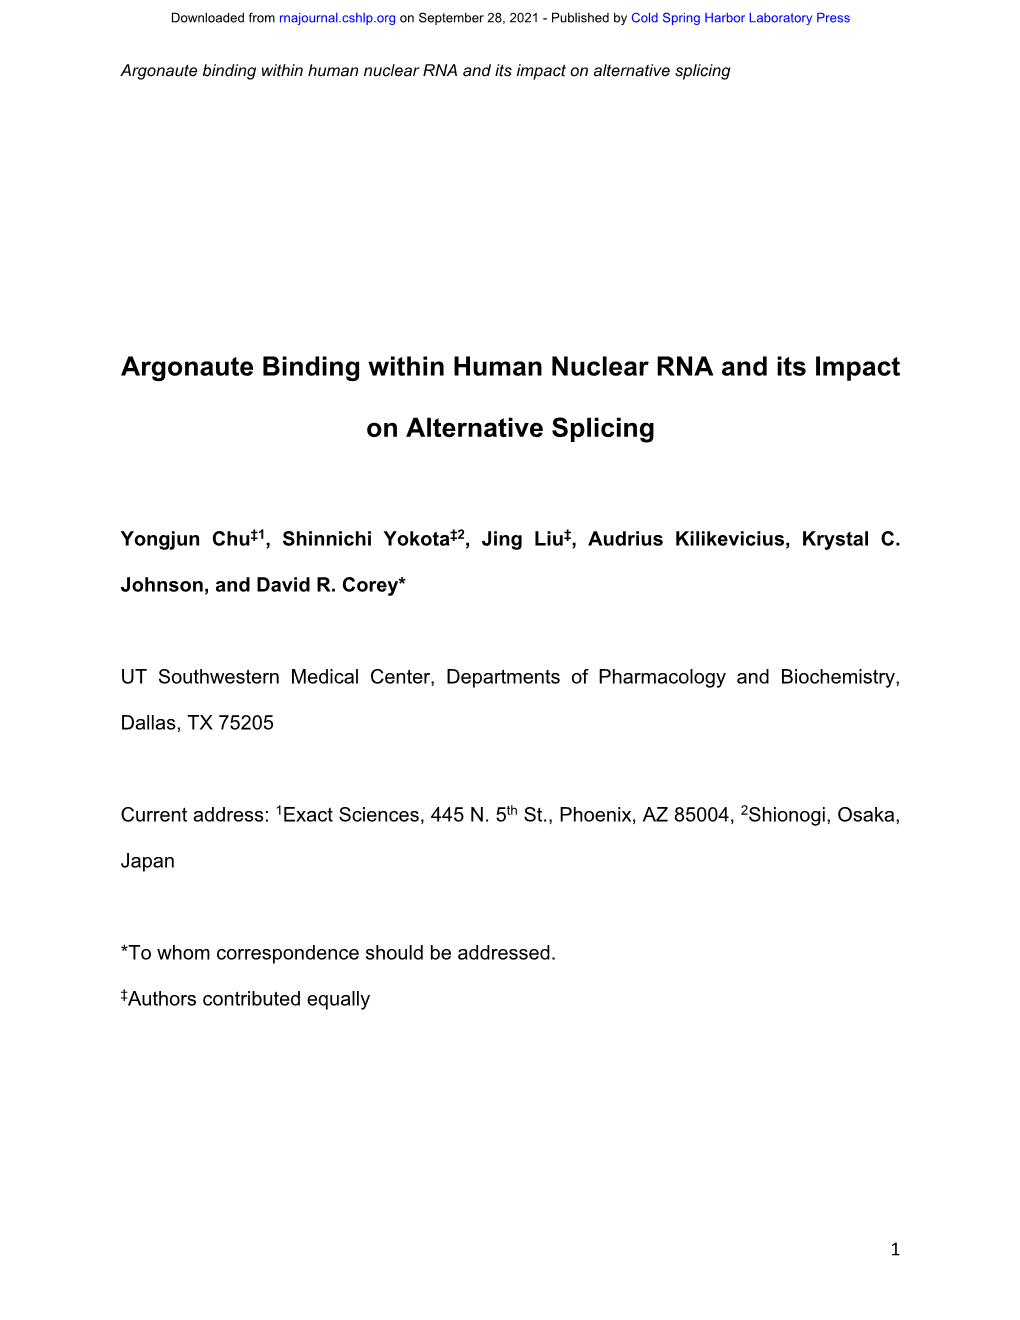 Argonaute Binding Within Human Nuclear RNA and Its Impact on Alternative Splicing